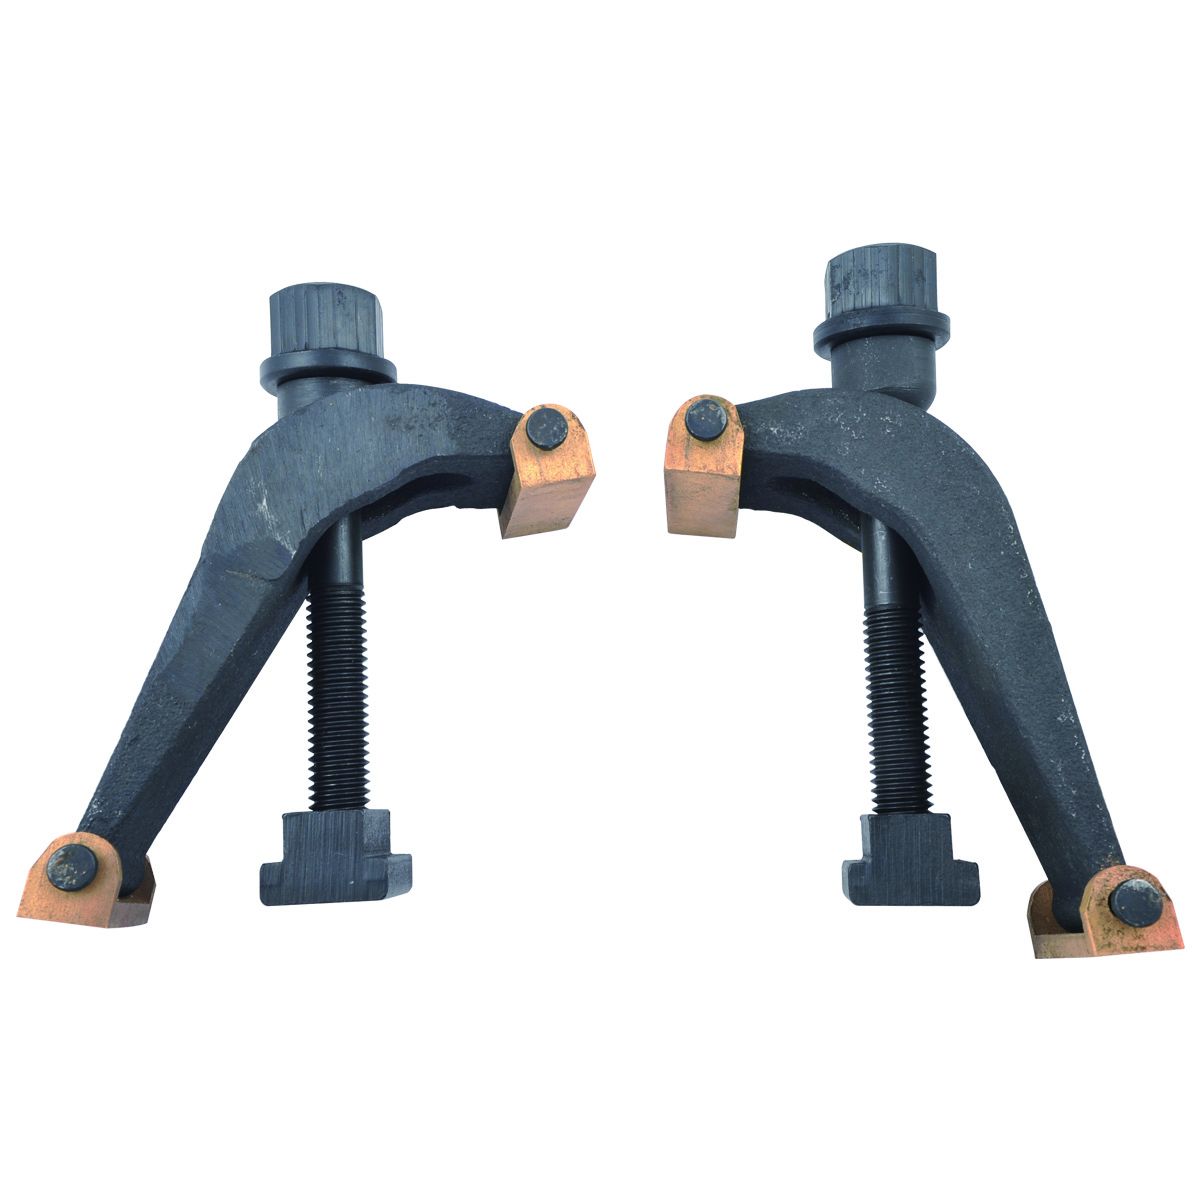 11/16" UNIVERSAL ADJUSTABLE CLAMP SET WITH BRASS PLATE (FIT 3/4" T-SLOT) (3900-0326)